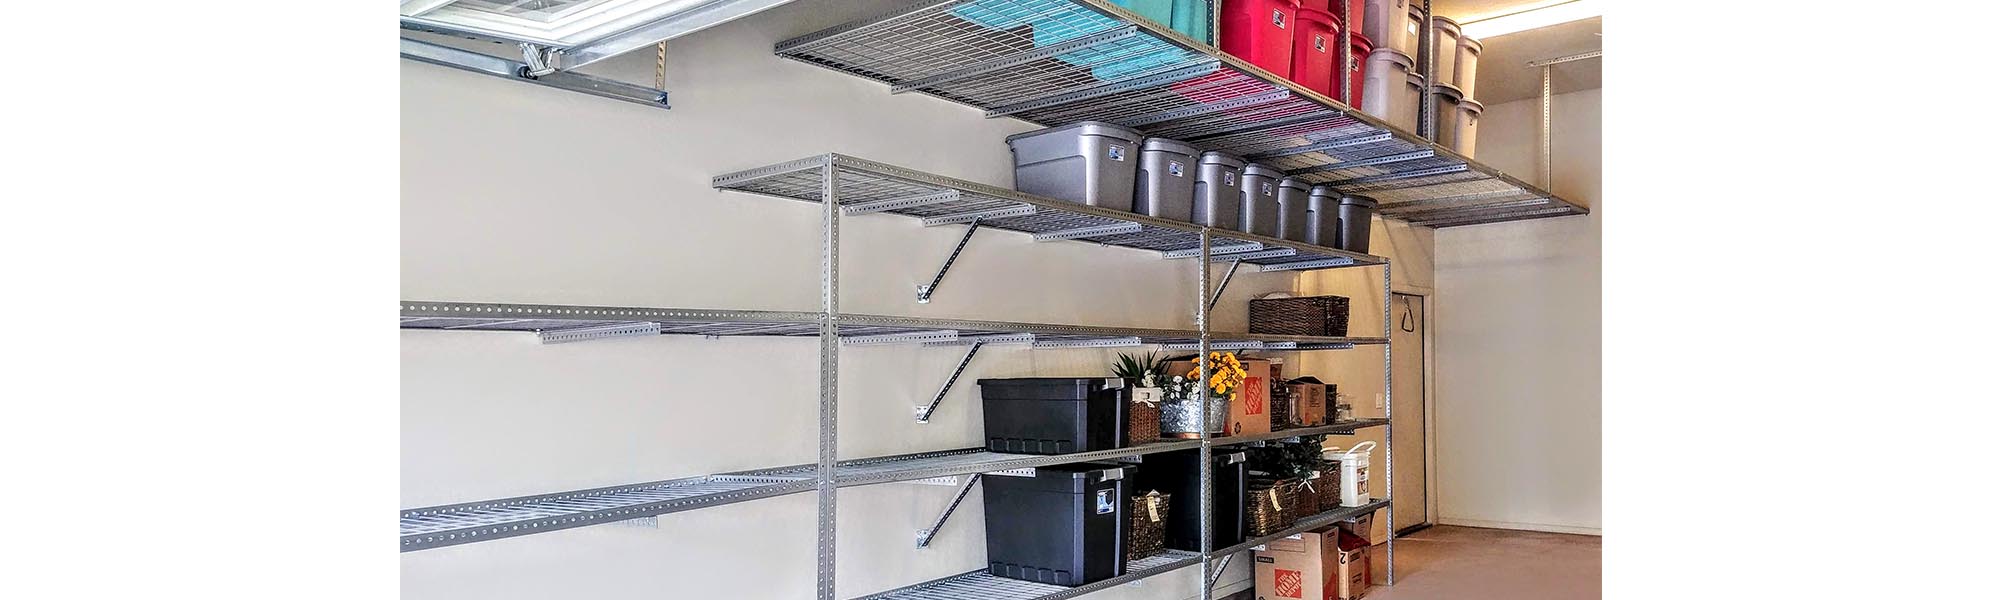 Overhead Garage Storage Shelves In, How To Install Wire Shelving Garage